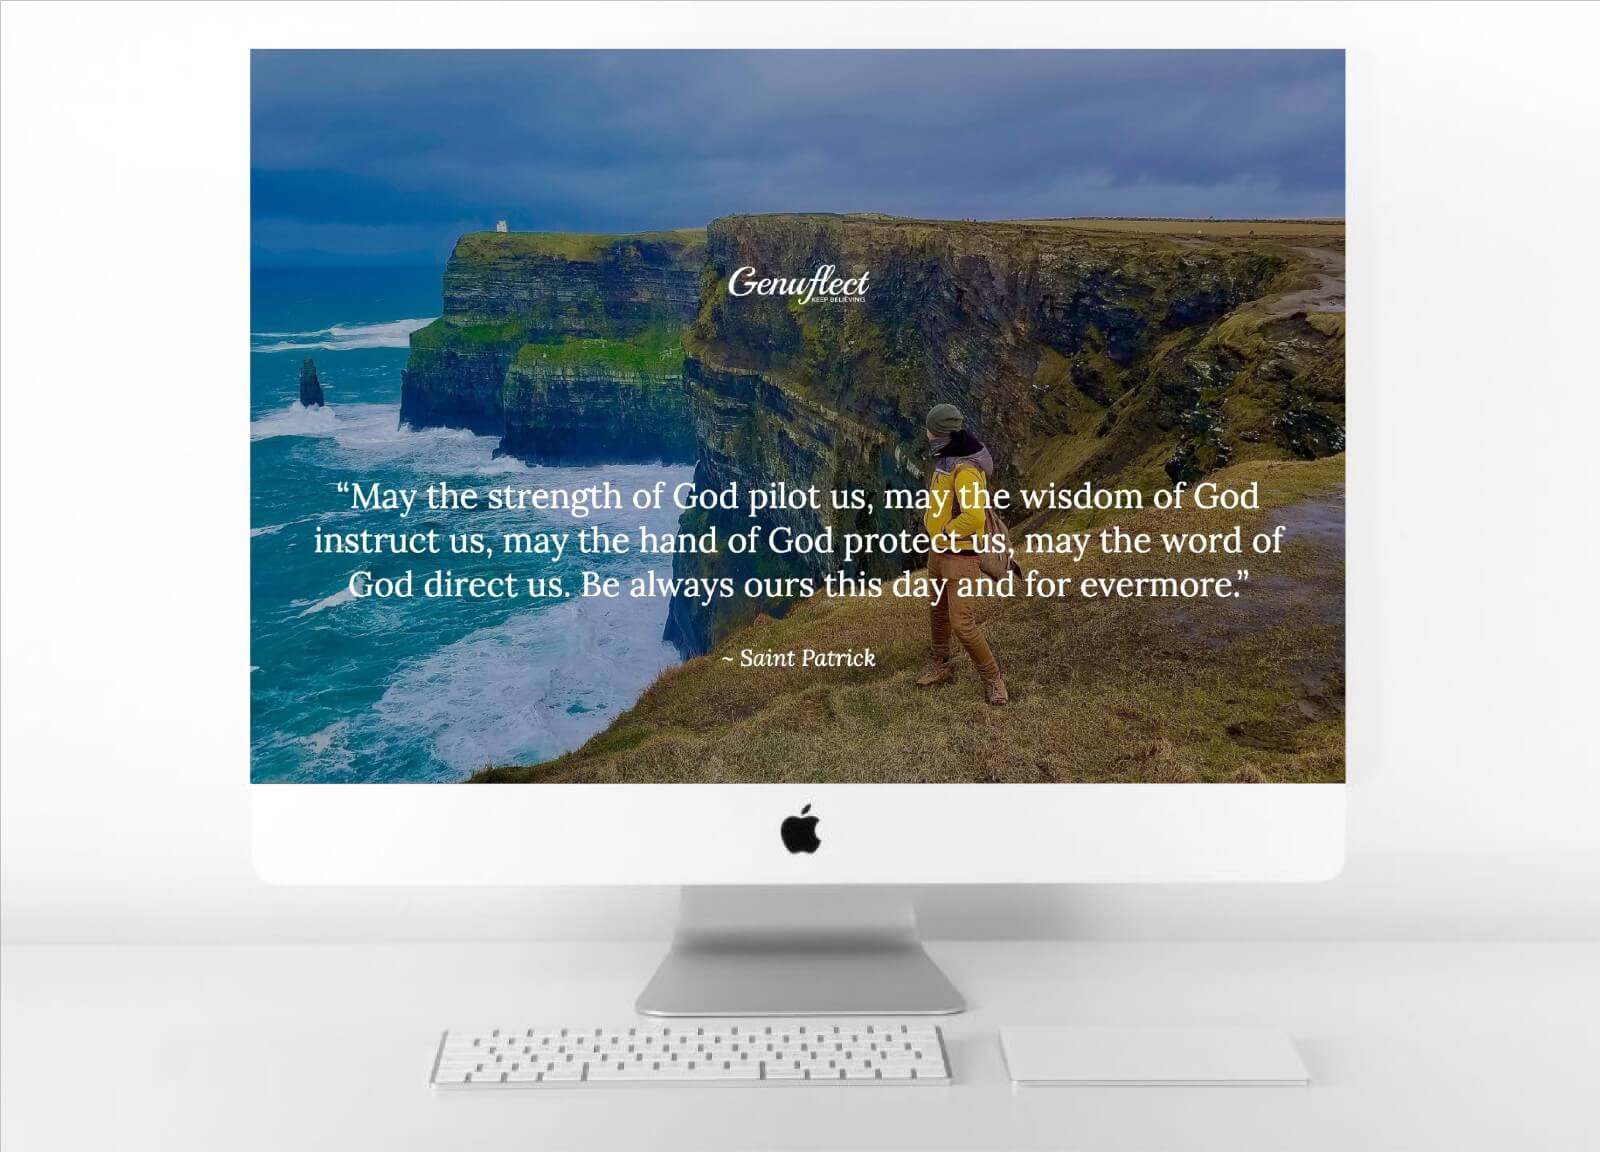 Genuflect Desktop background image of Man standing on the edge of the Cliffs of Moher looking out over the water